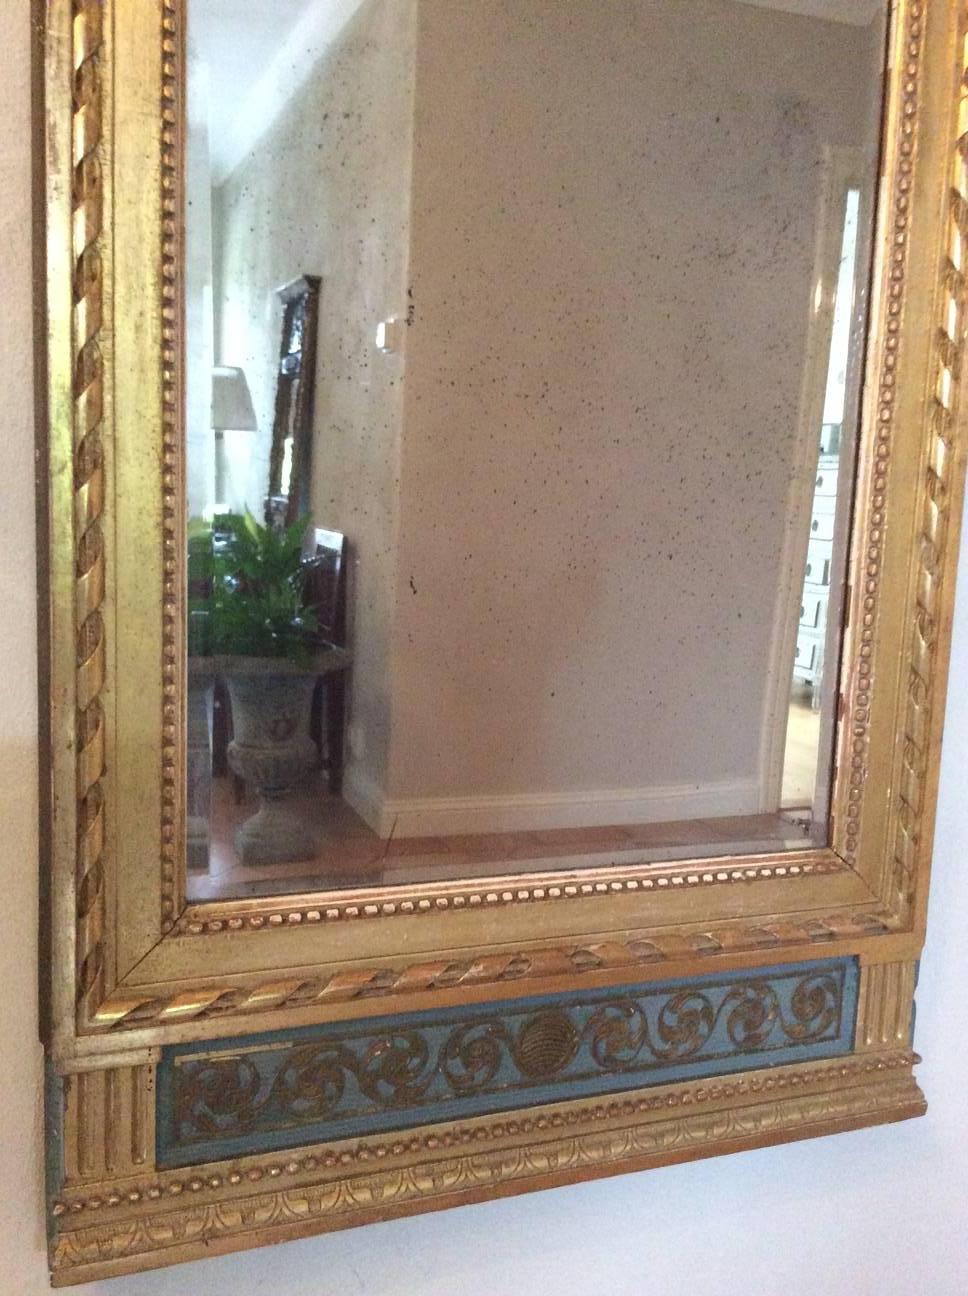 18th century Swedish Gustavian giltwood mirror. Large and in fantastic condition. Signed by master Olof Wetterberg (1784-1803). Original mirror glass and gilt. In the top crown prince Gustav Adolf cipher, GA. He was crowned king in year 1800 as